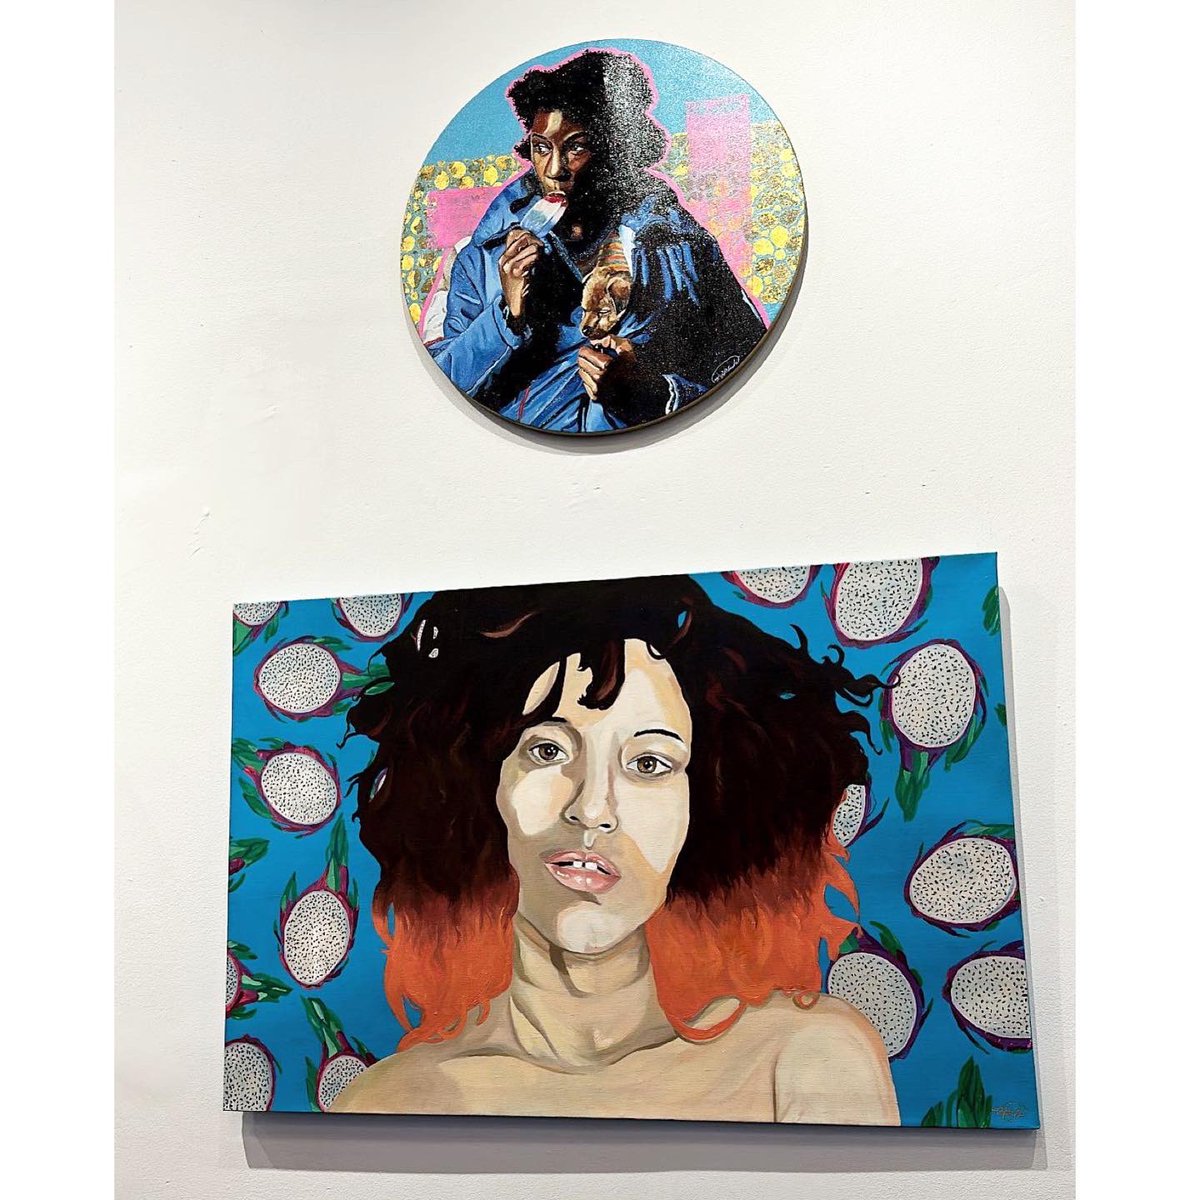 📣Uptown NOW: Women in the Heights📣

Listen up folks, don’t let the rain deter you & go right NOW to check out the 14th Annual #WomenInTheHeights exhibit. You have until 5 pm to take in all the art awesomeness.

S/O @andreaarroyoart 

nomaanyc.org/2023/01/2023-w…

#NoMAA